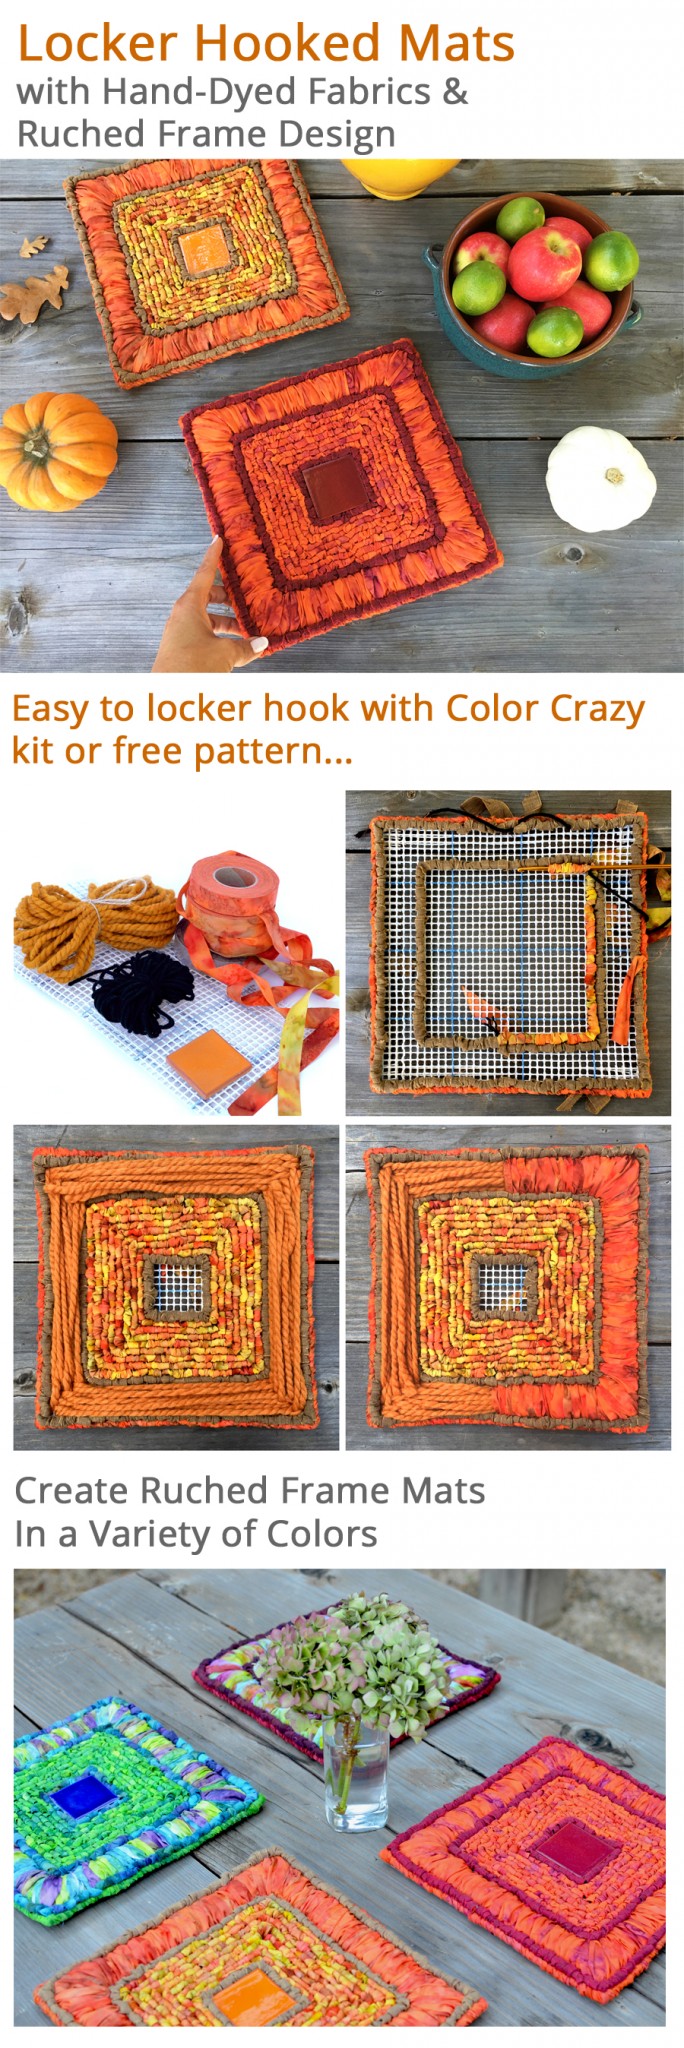 ruched-frame-locker-hooked-mat-how-to-pattern-gocolorcrazy2